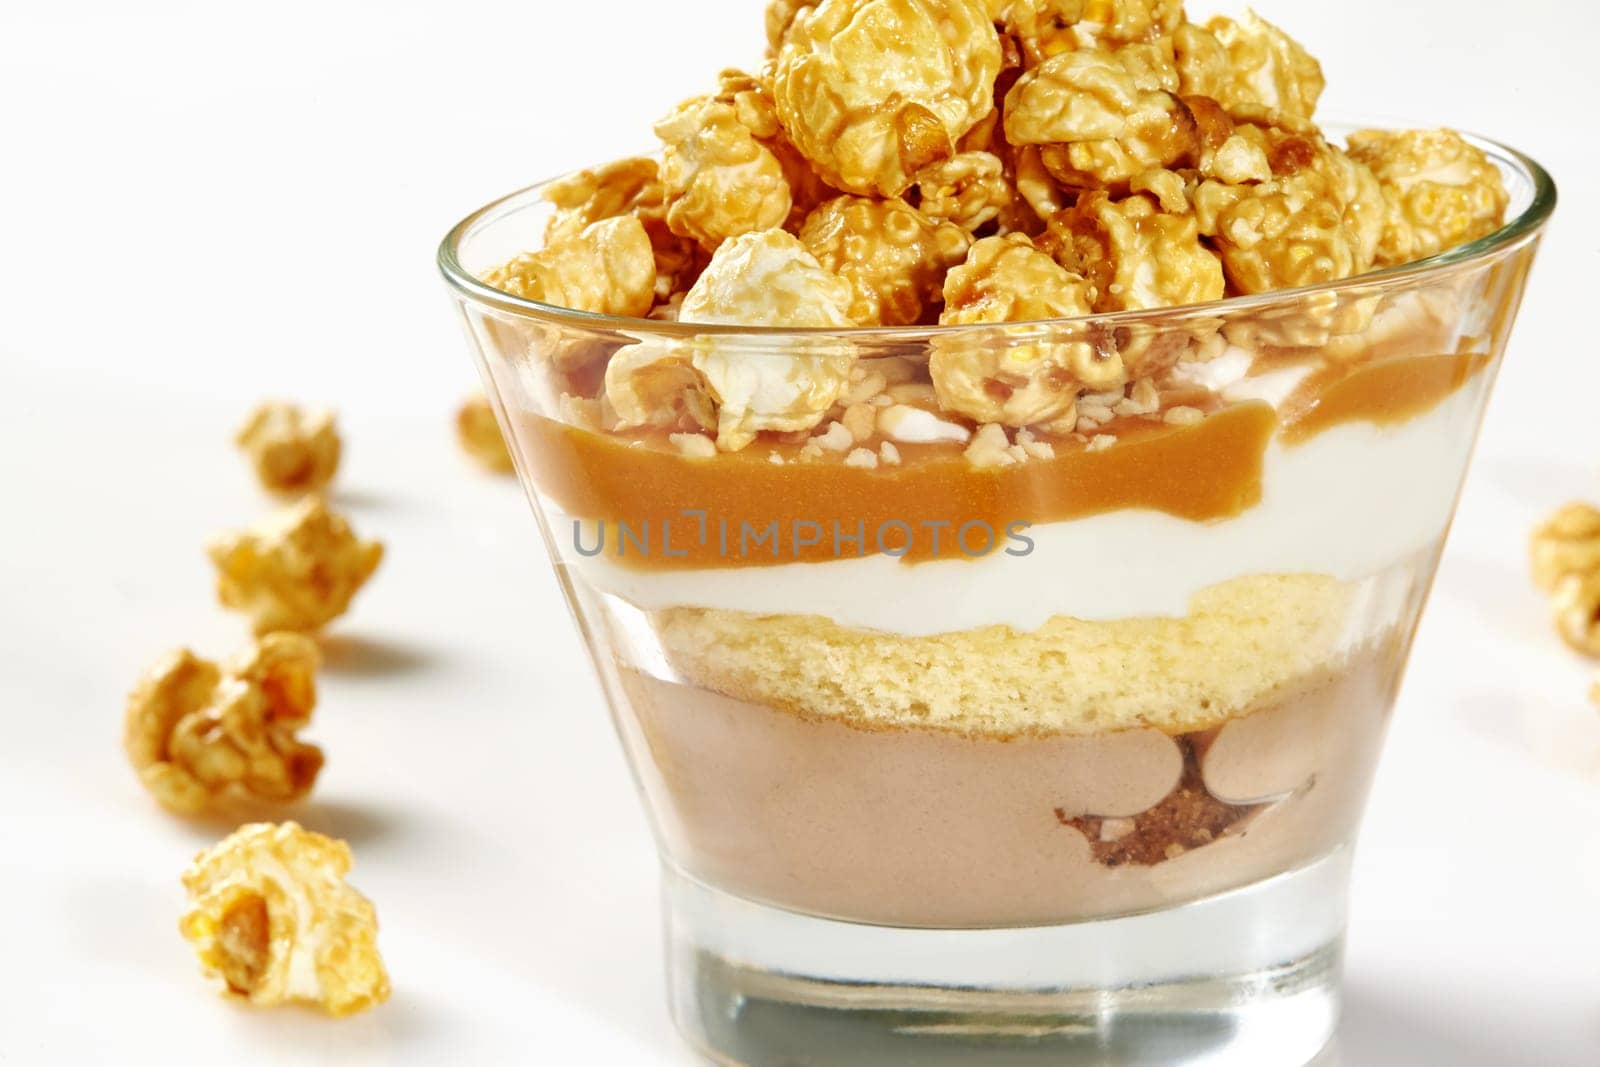 Glass of delicate layered dessert with ice cream, peanut crumbs, soft sponge cake, whipped cream and sweet caramel sauce decorated with crispy caramel-coated popcorn